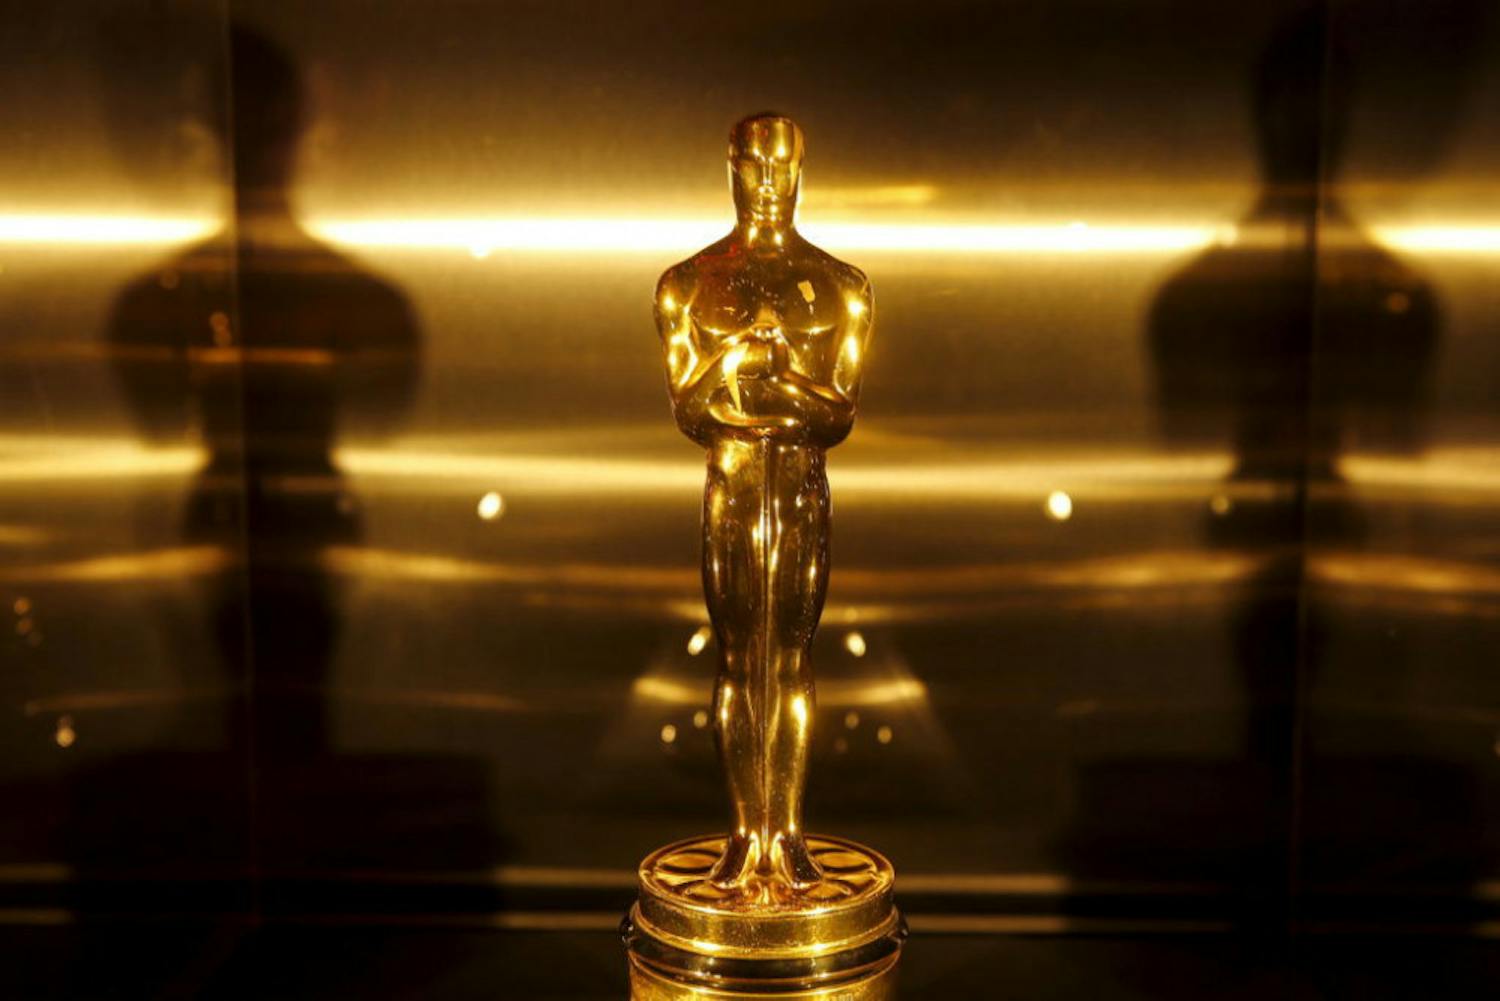 The 91st Academy Awards will air Sunday Feb. 24 at 8 p.m.